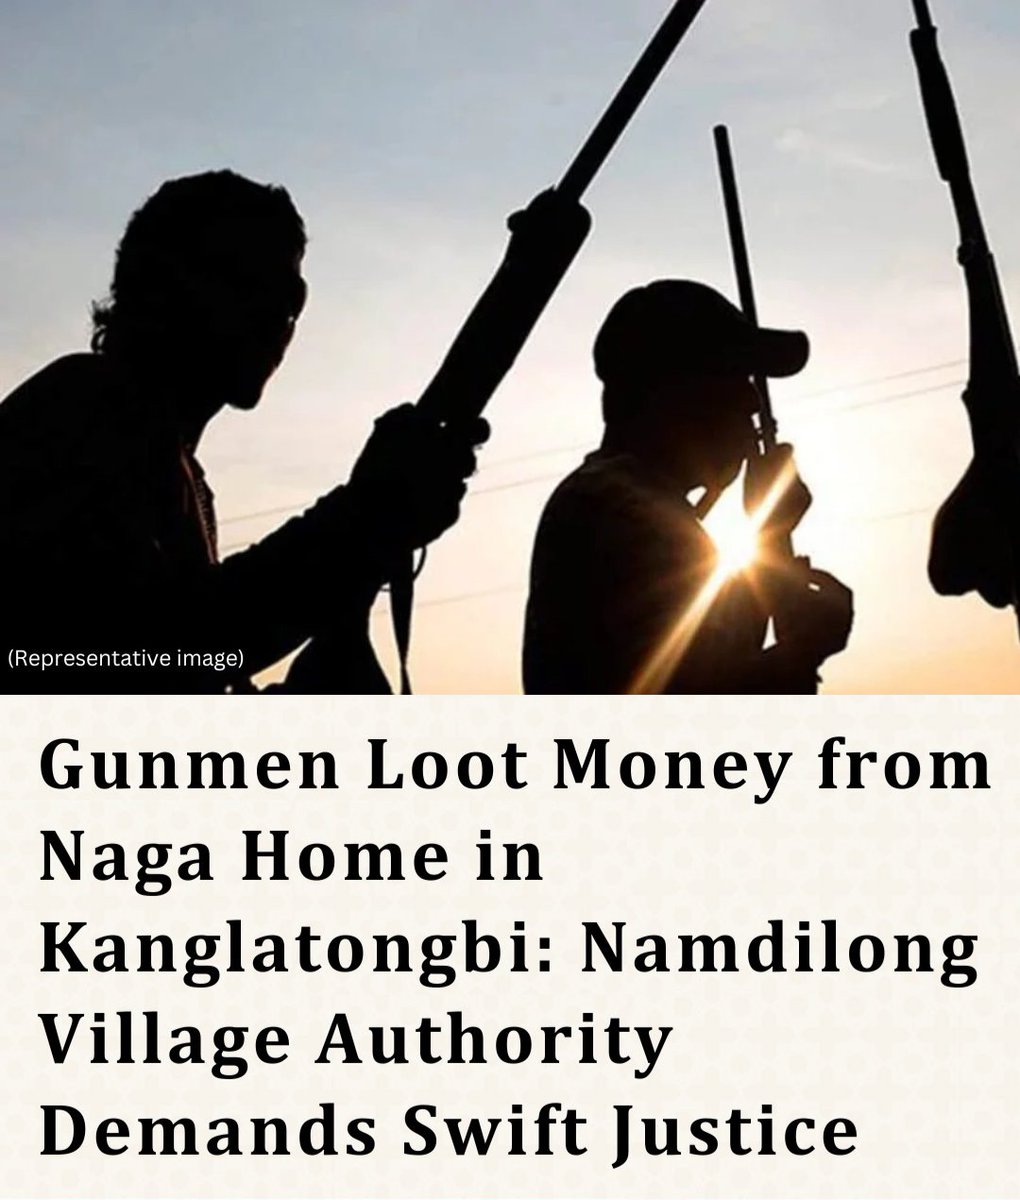 The Namdilong (Kanglatongbi) Village Authority and the Global Liangmai Forum (GLF) have strongly condemned the May 8 evening incident at Kanglatongbi where gunmen allegedly looted money from a house.
#ManipurUnrest
#ManipurViolence
#ManipurViolenceModiSilence